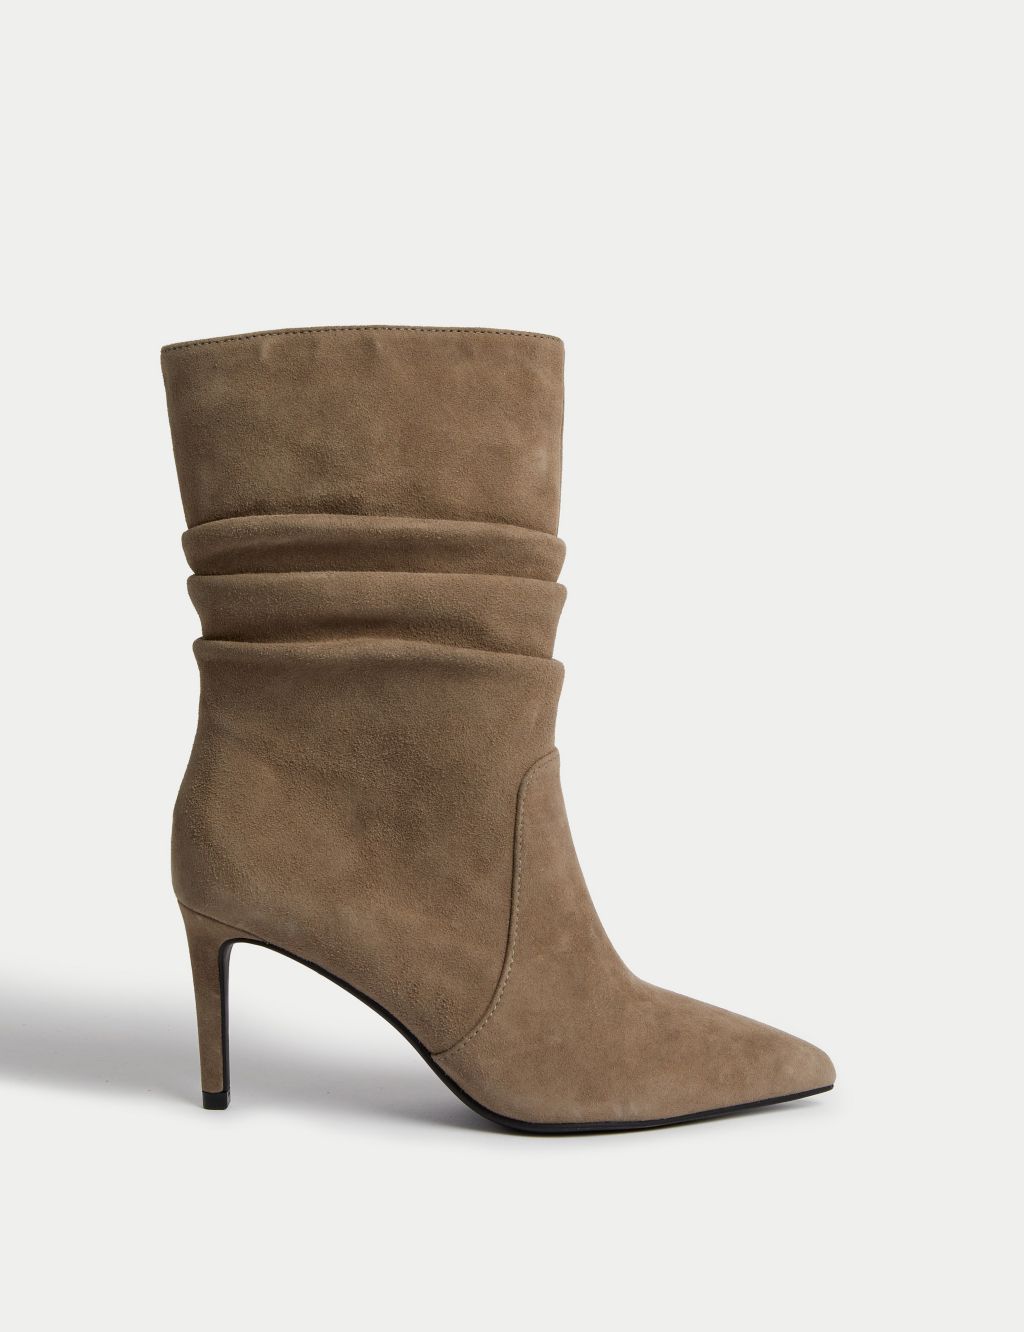 Suede Stiletto Heel Pointed Ankle Boots image 1